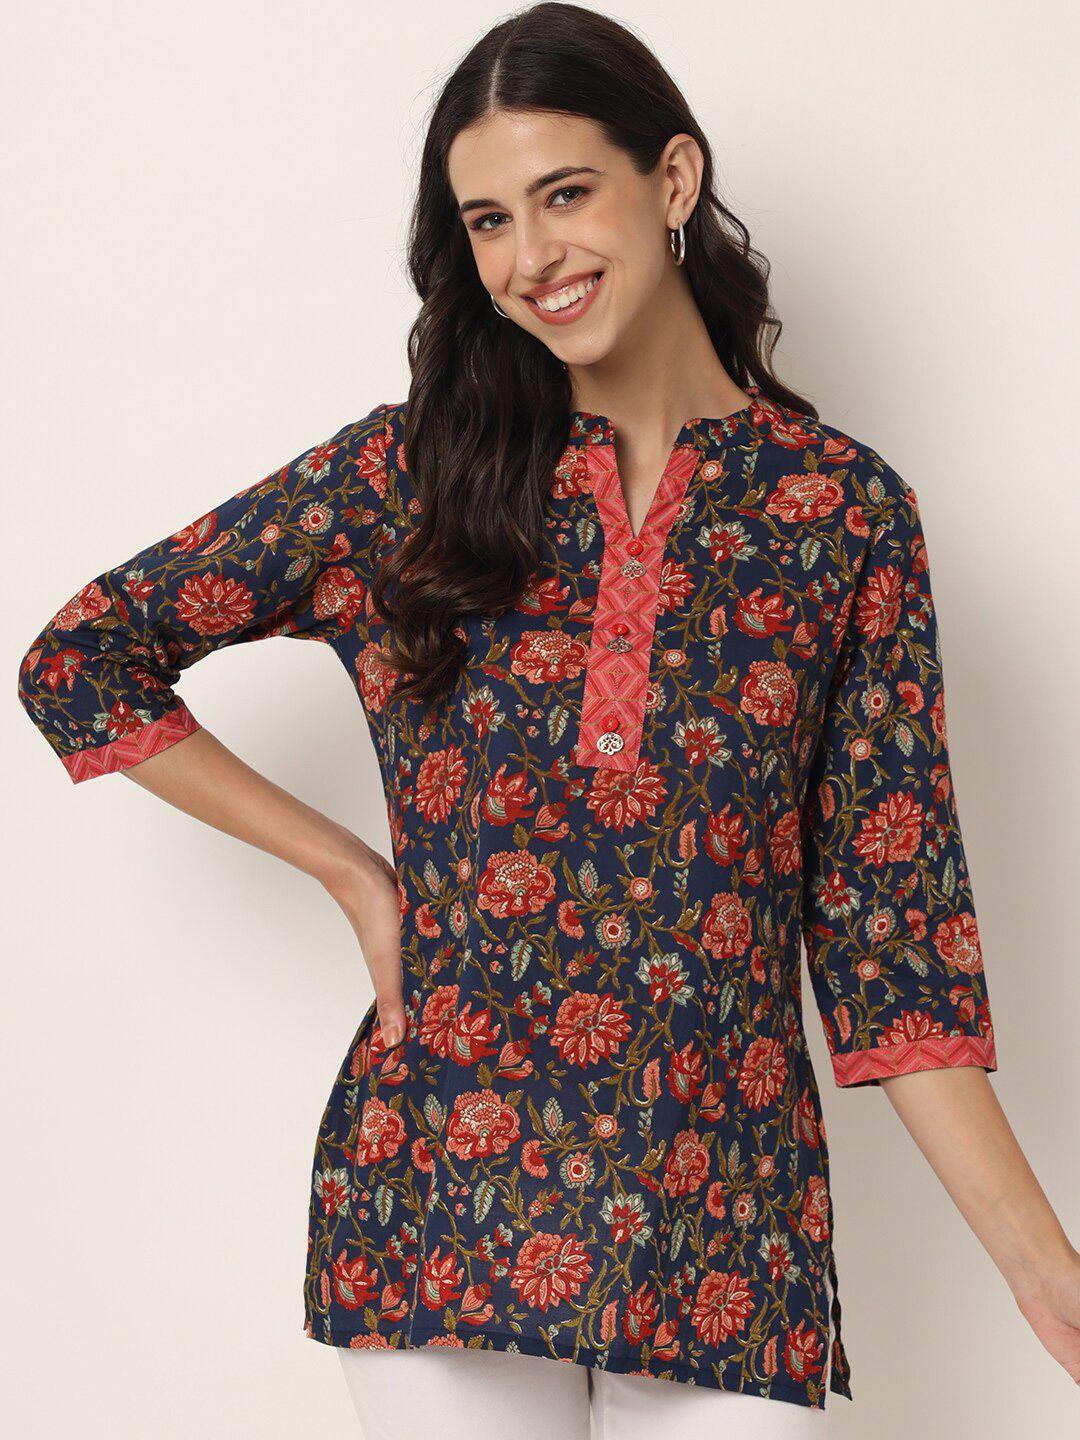 fabric fitoor women navy blue & coral floral print cotton shirt style top